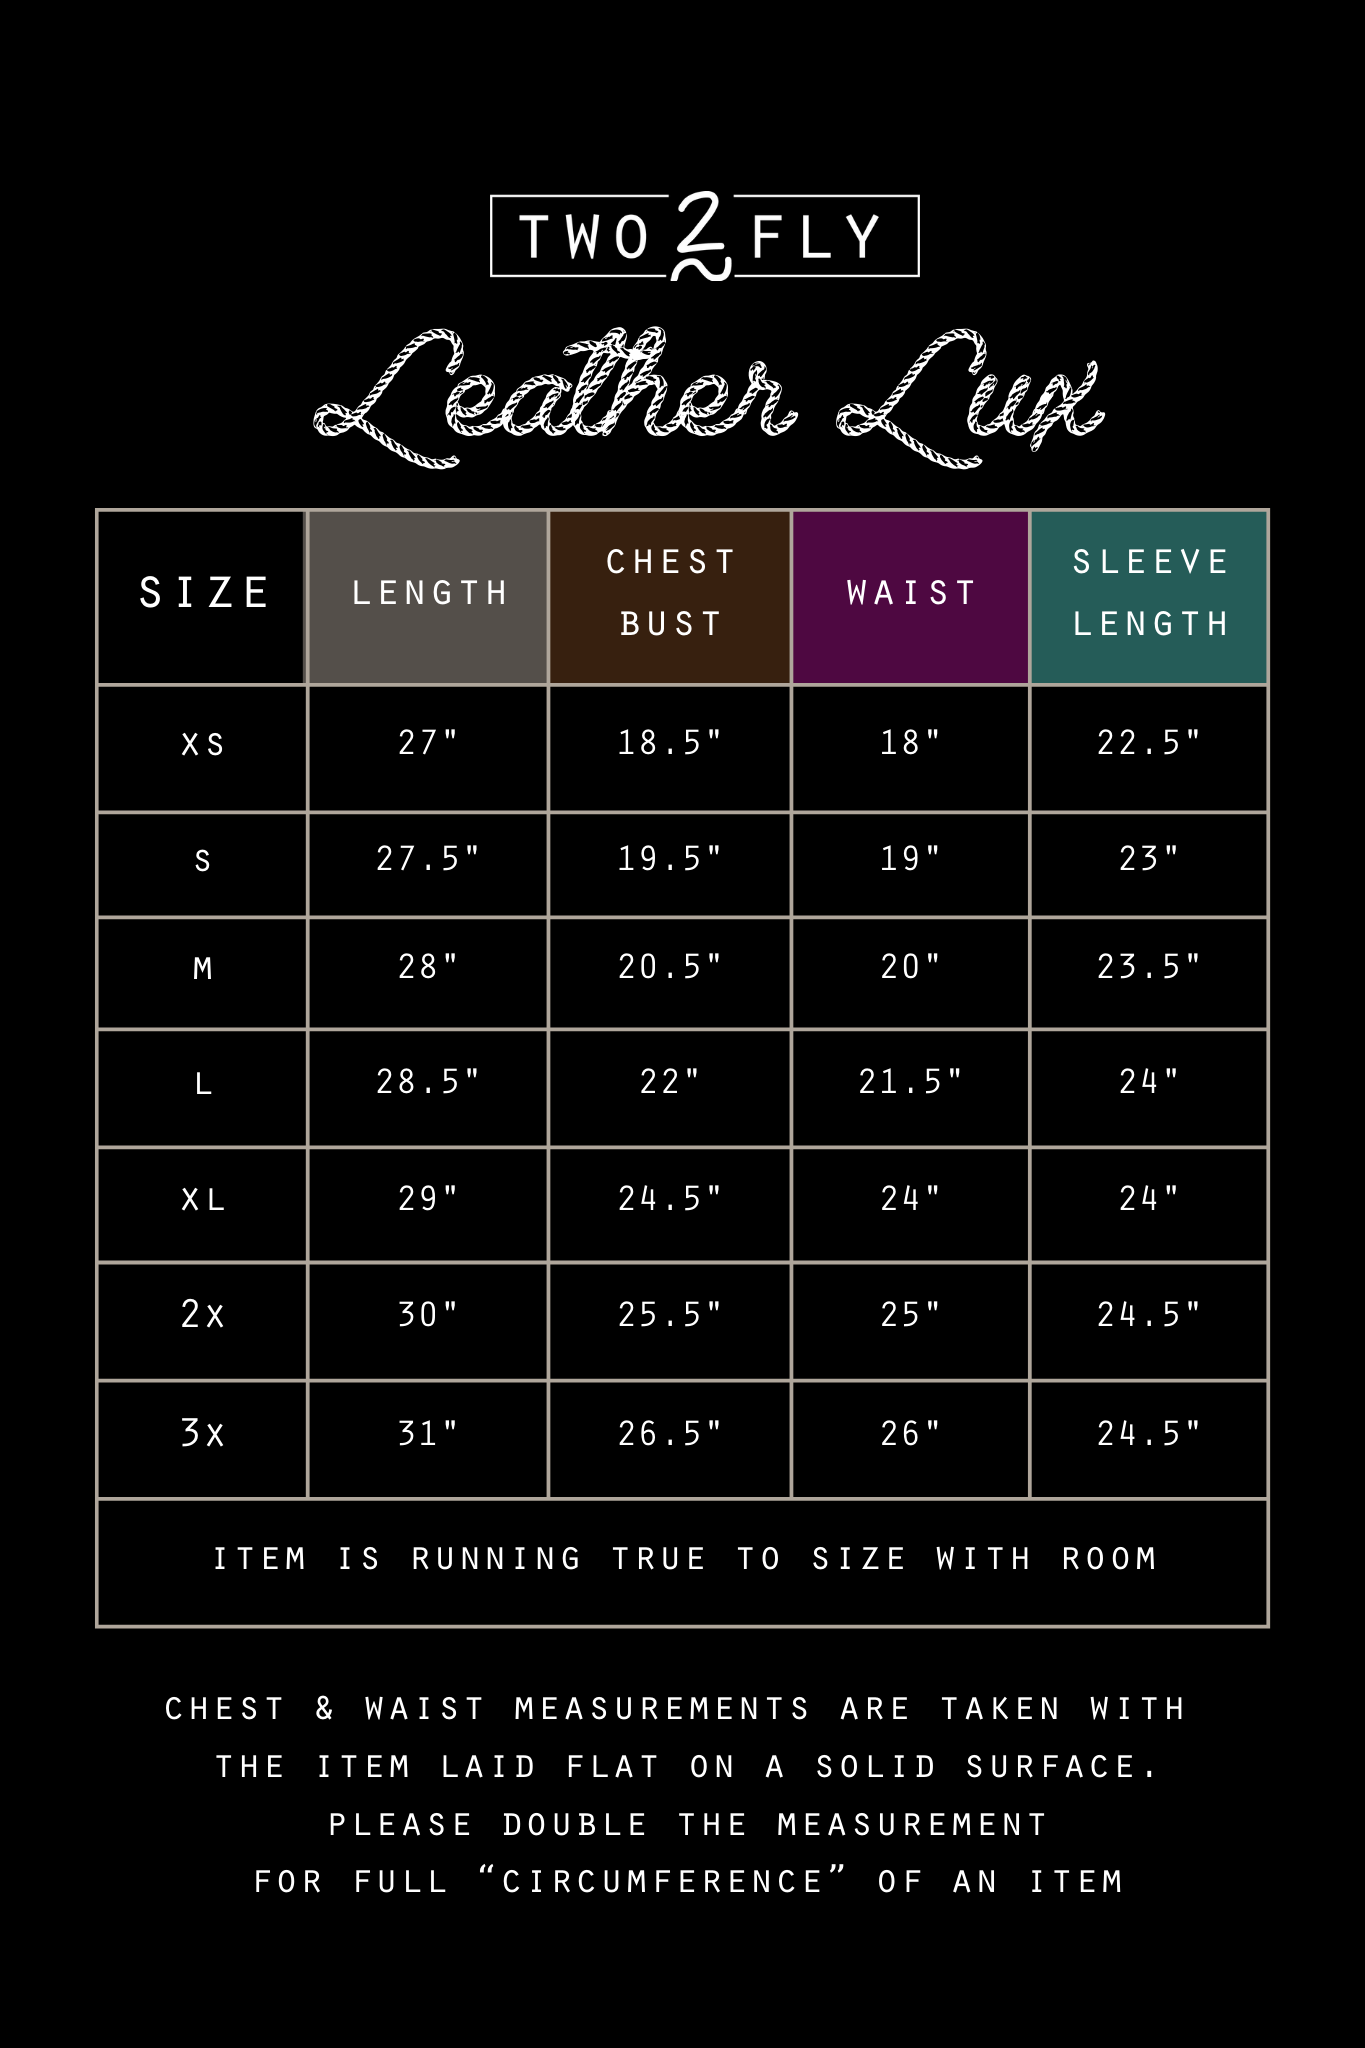 LEATHER LUX* AGAVE [MISSING SIZES]